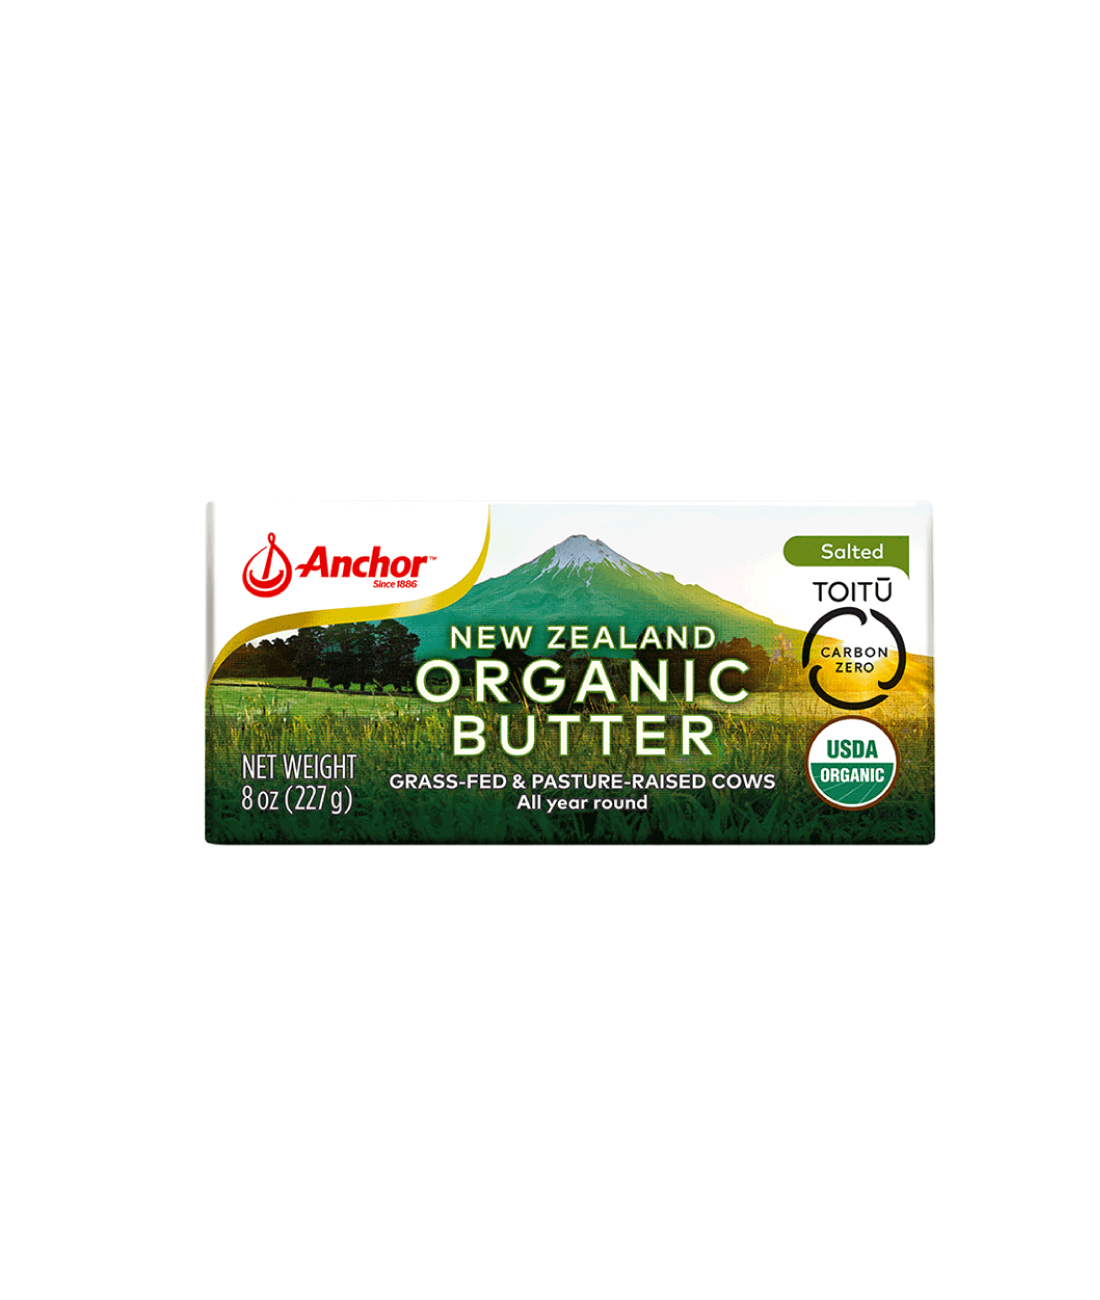 Anchor Organic carbonzero ™ Certified Salted Butter